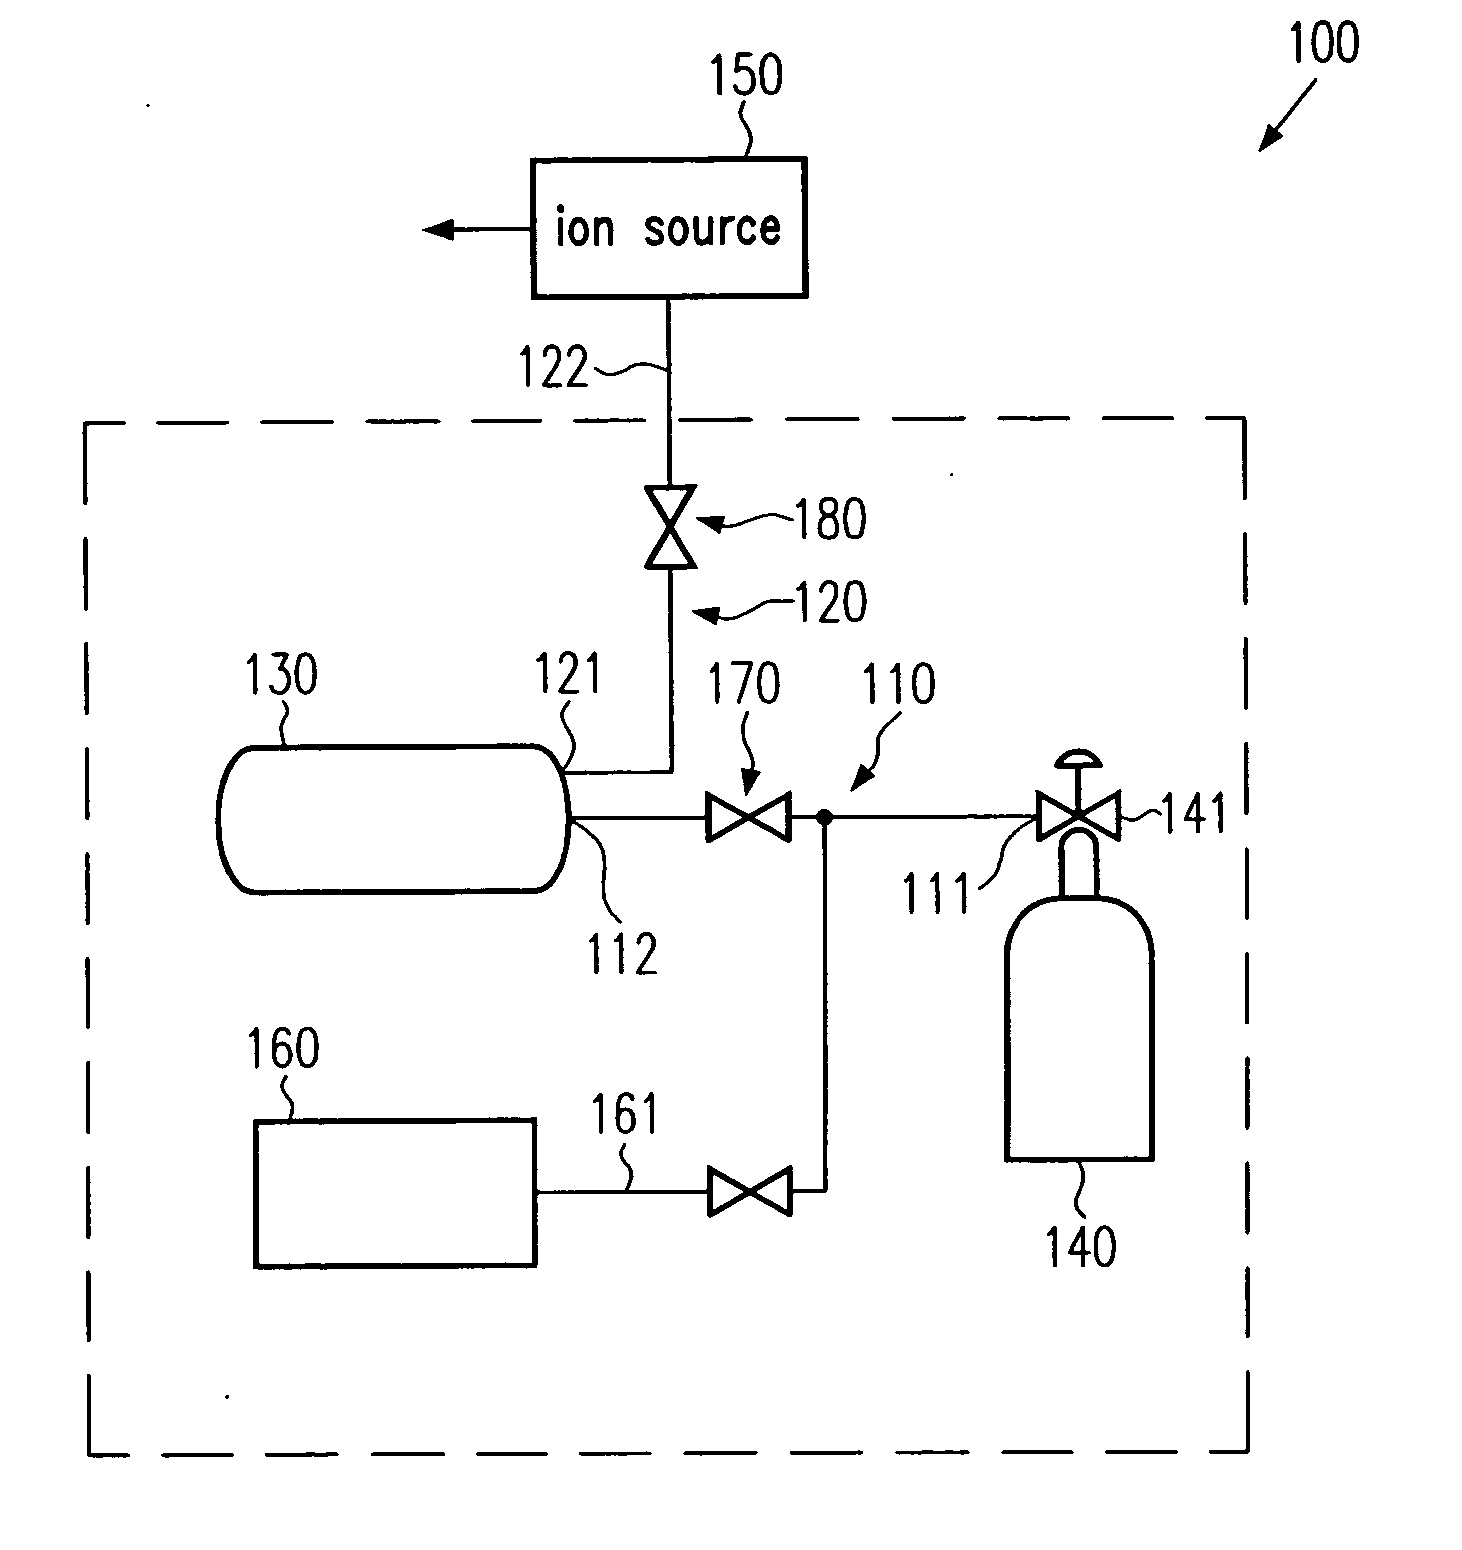 System and method for supplying precursor gases to an implantation tool